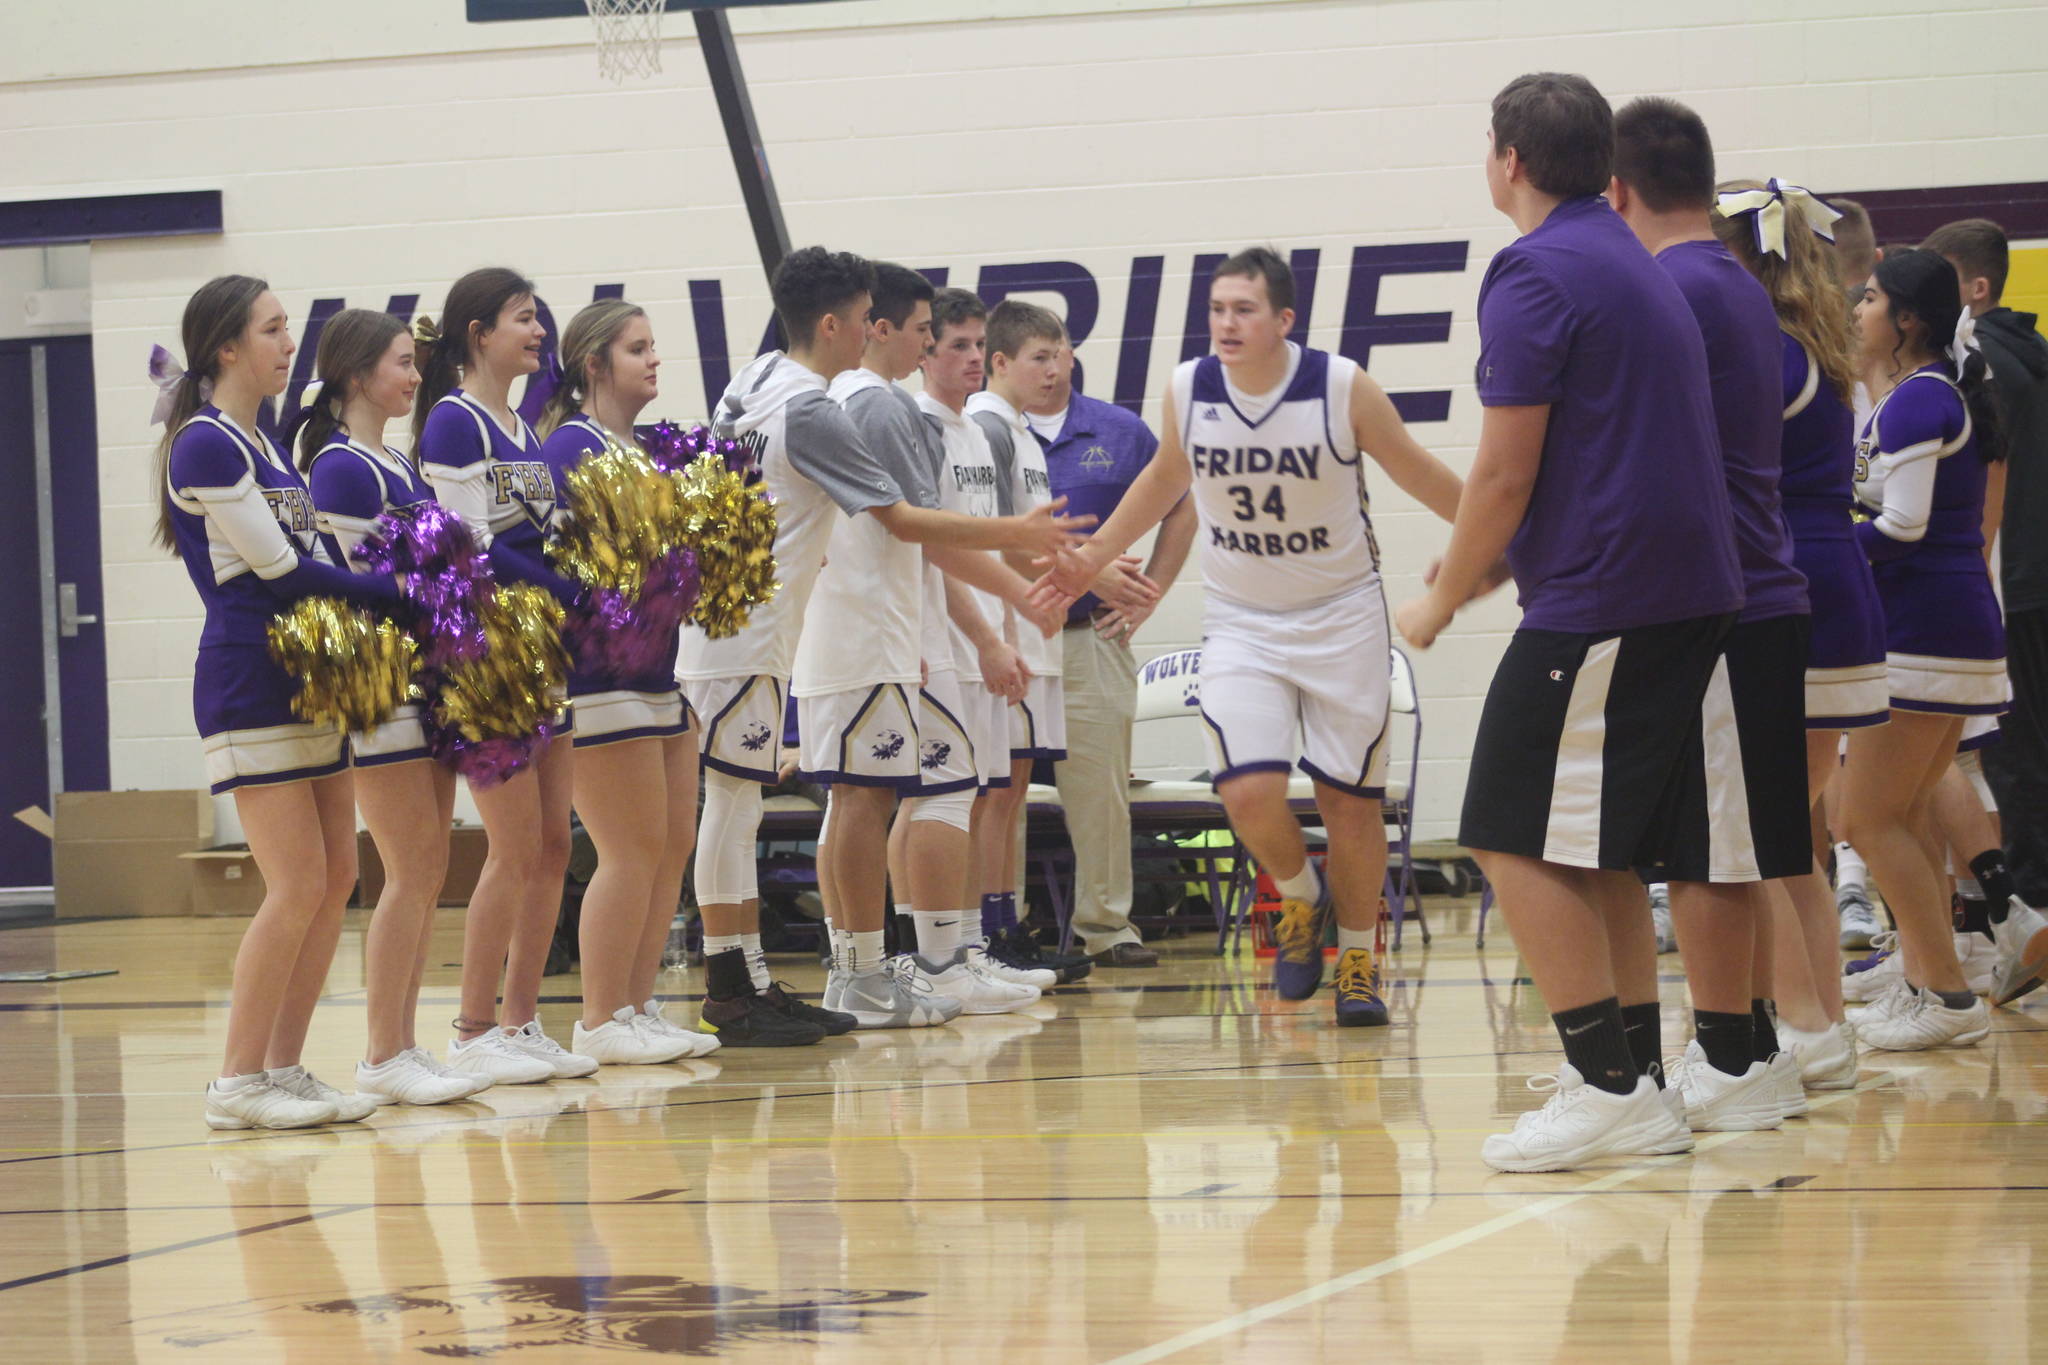 Staff photo/ Heather Spaulding. Cheerleaders welcome the boys team starting line up to the court.